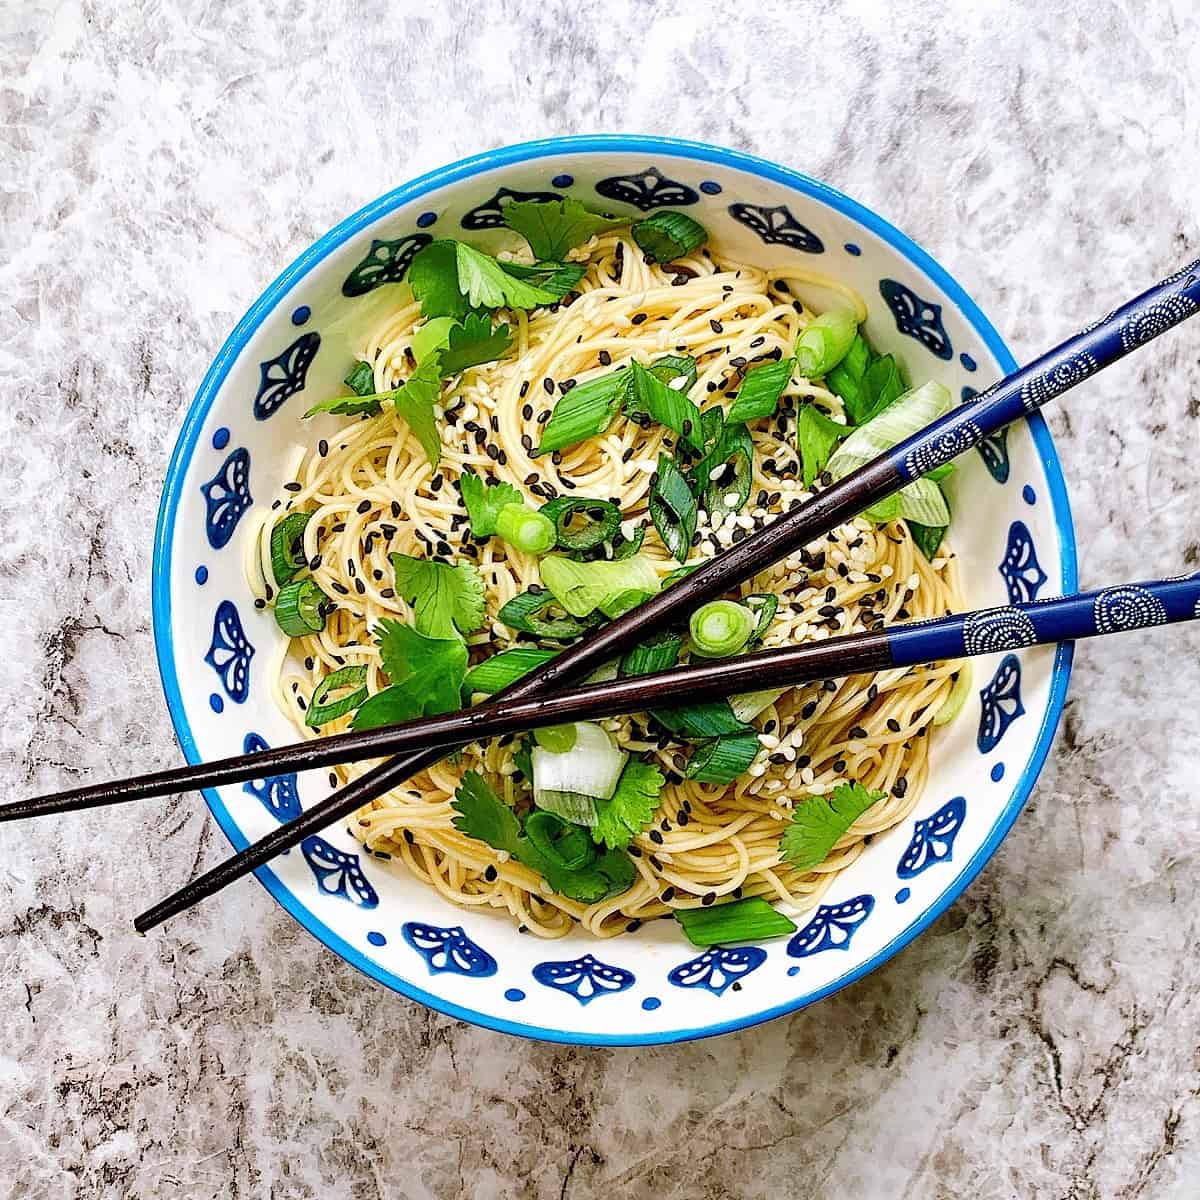 Soba noodle salad in bowl with chopsticks topped with sesame seeds and cilantro